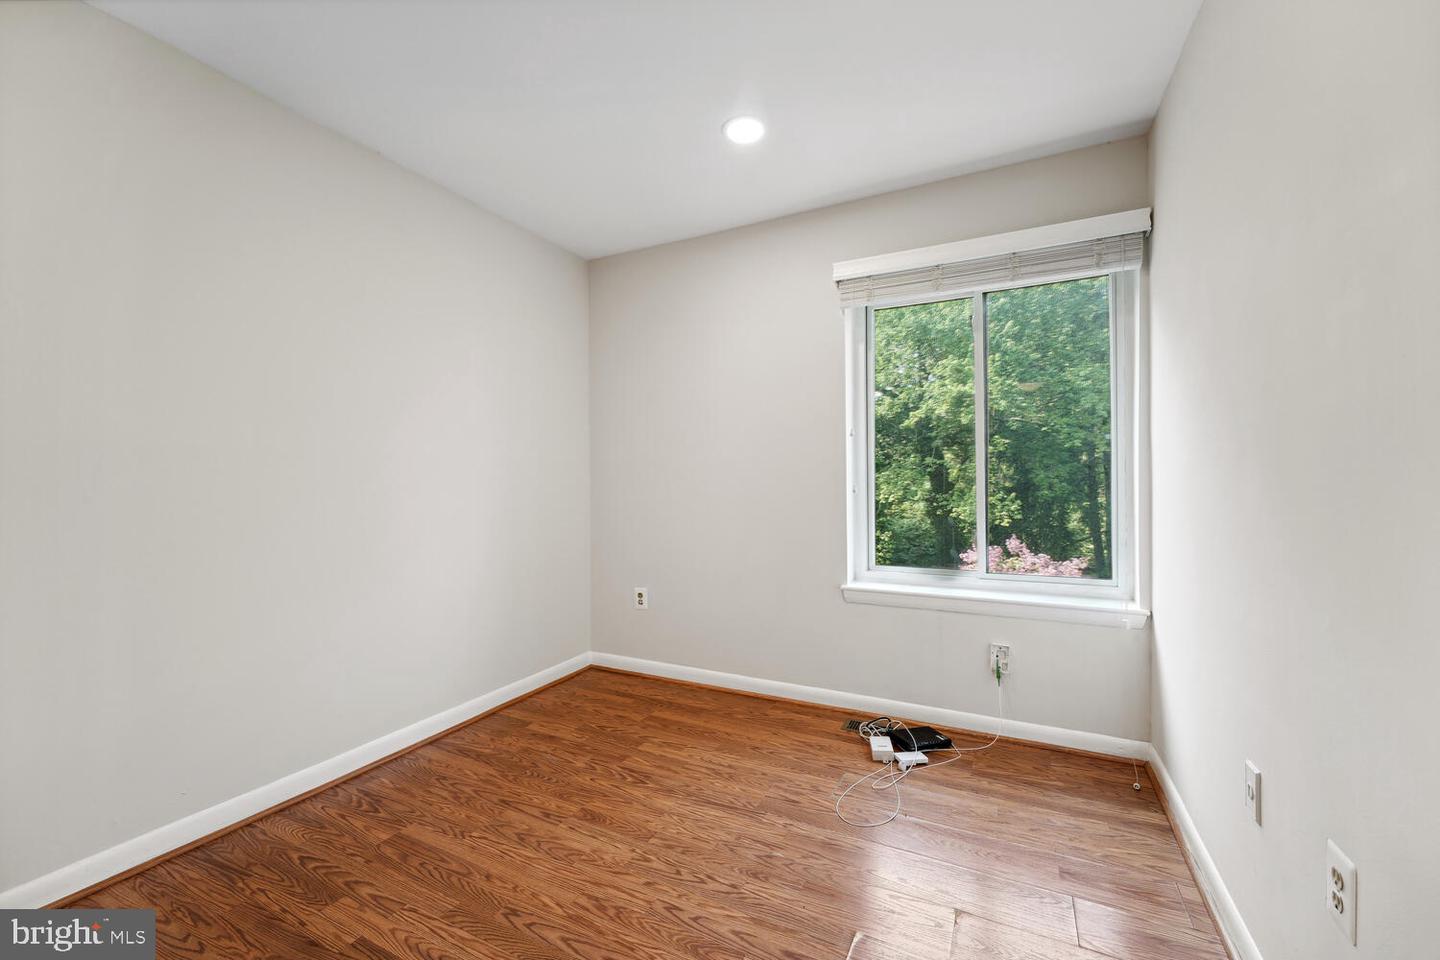 Photo 11 of 15 of 528 Brummel Ct NW #528 townhome